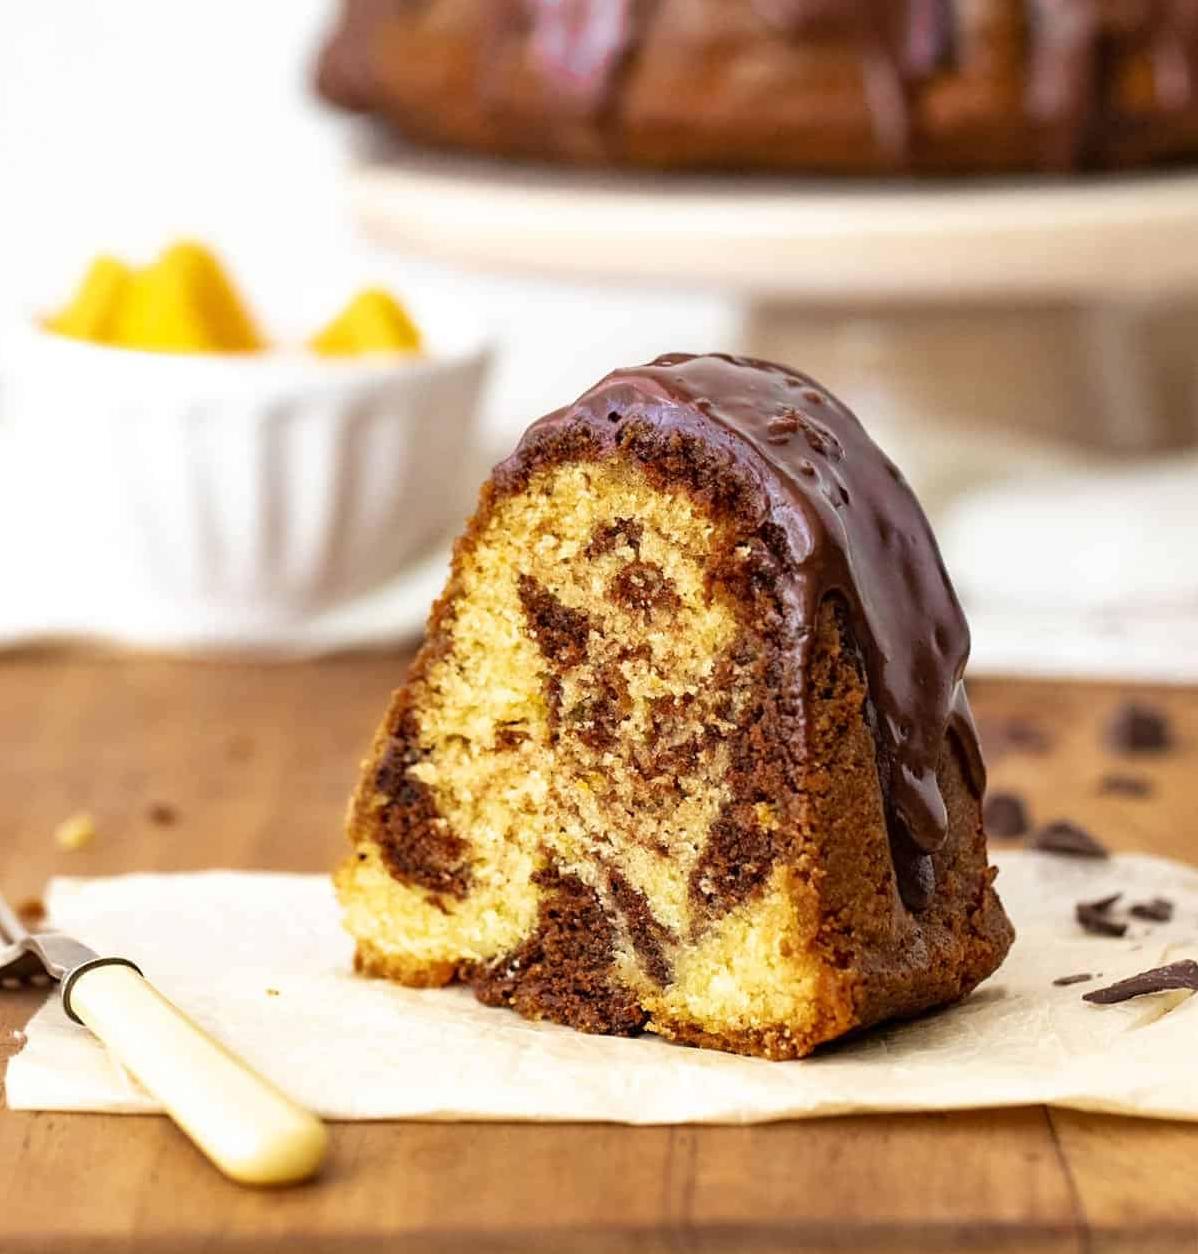  Get ready to satisfy your sweet tooth with this pound cake